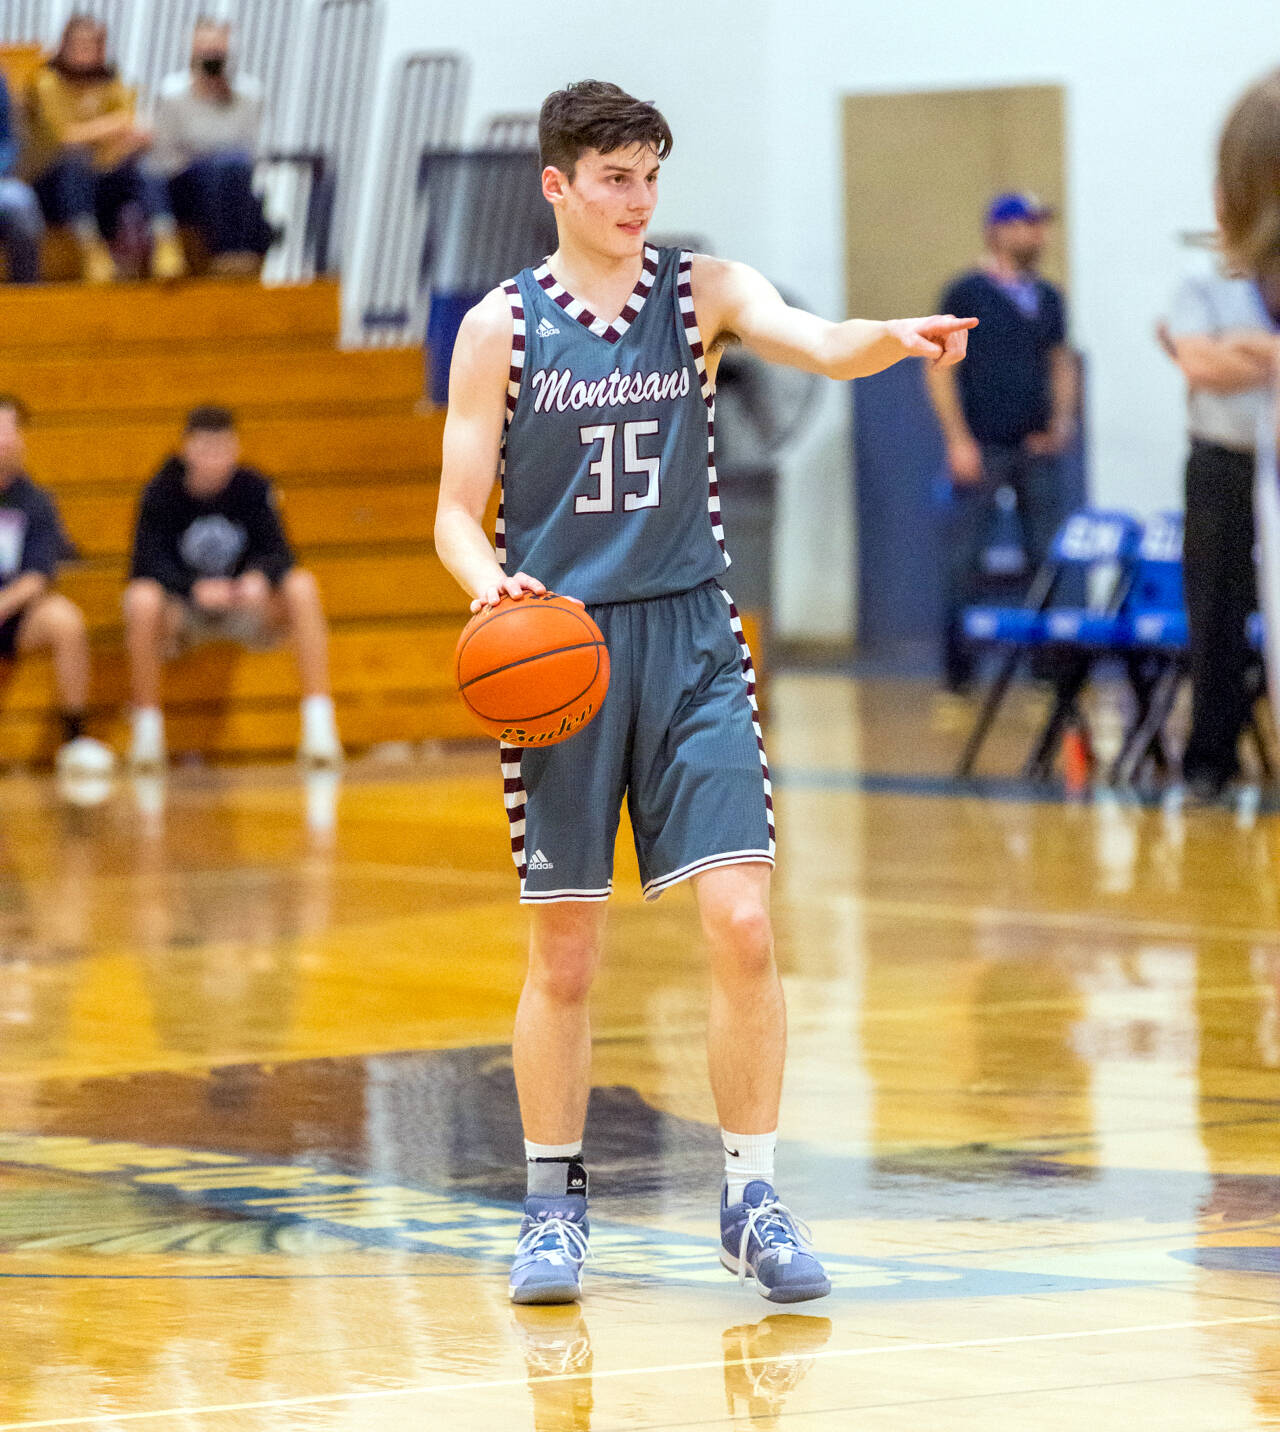 PHOTO BY SHAWN DONNELLY Montesano senior guard Caydon Lovell was named to the 1A Evergreen League First Team league officials announced earlier this week.